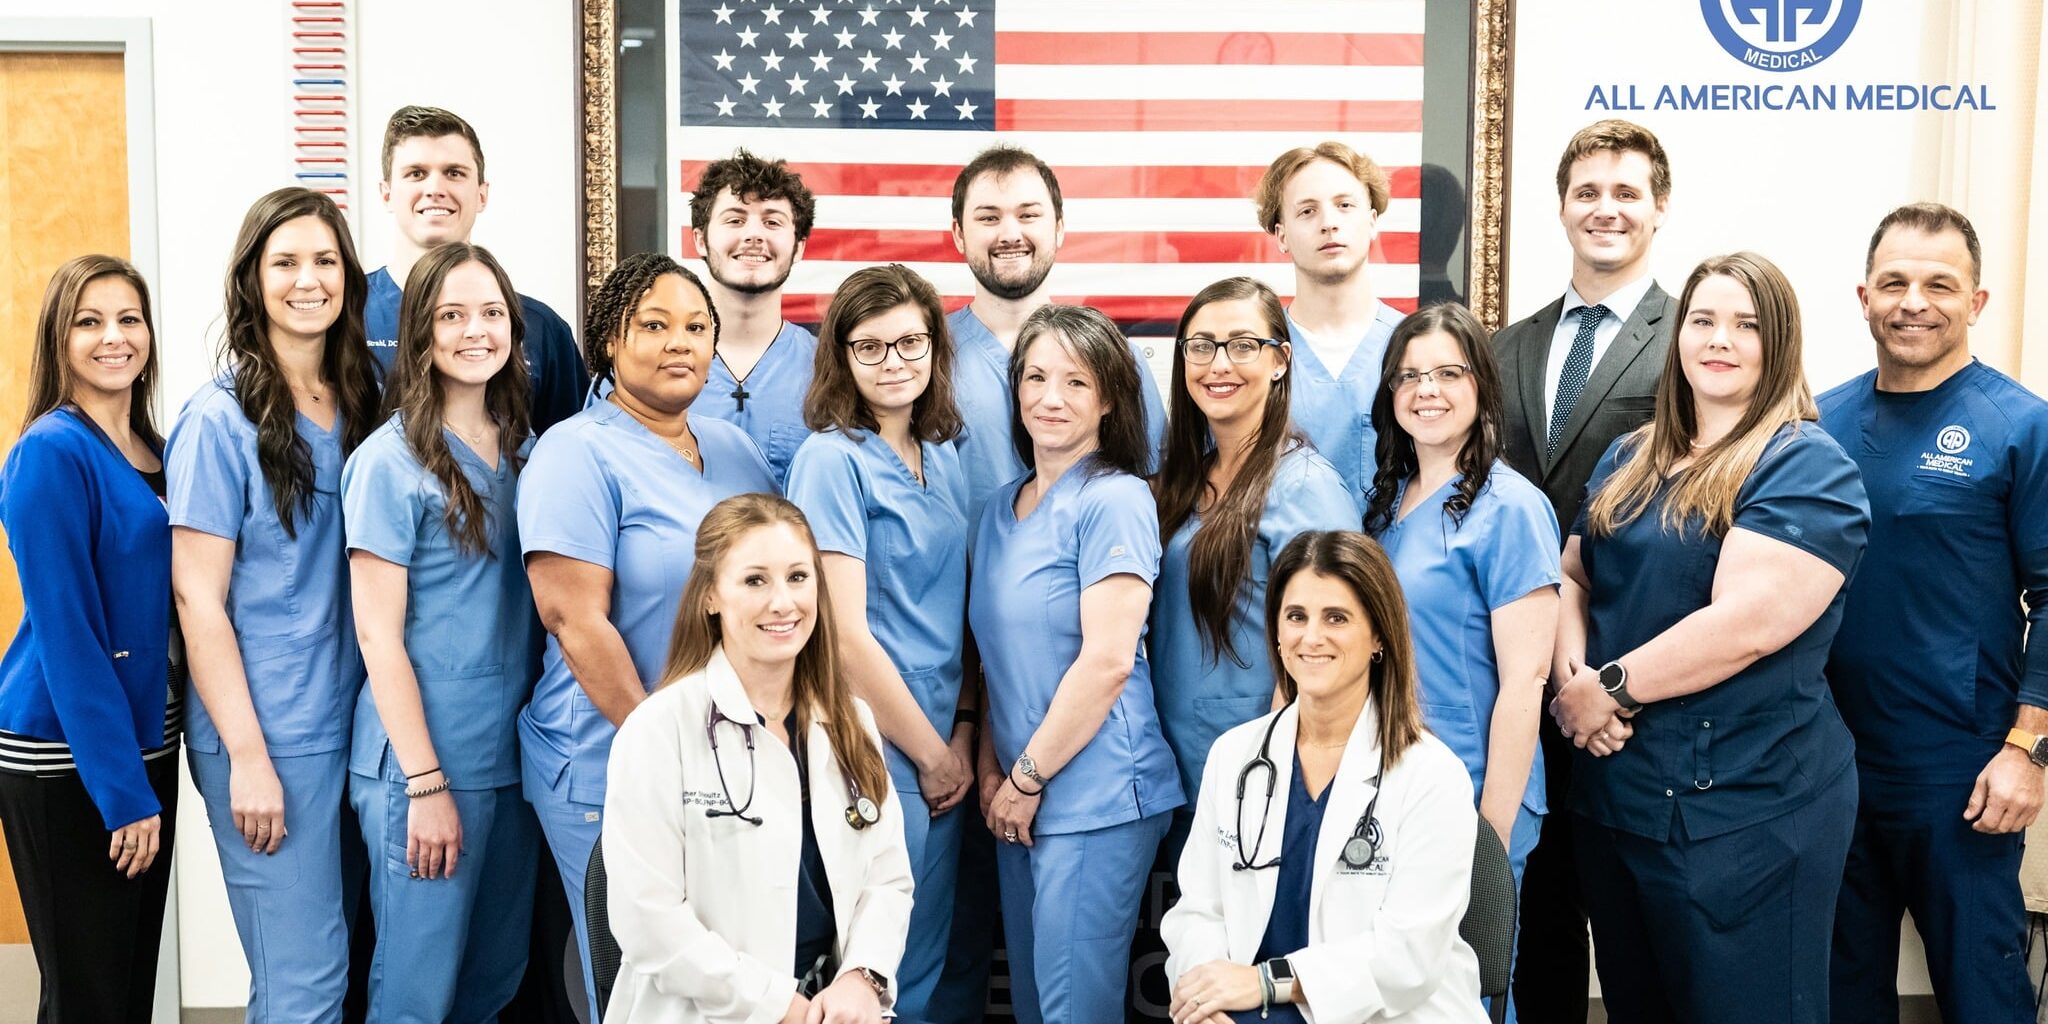 The Pain Management Staff at All American Medical Covington